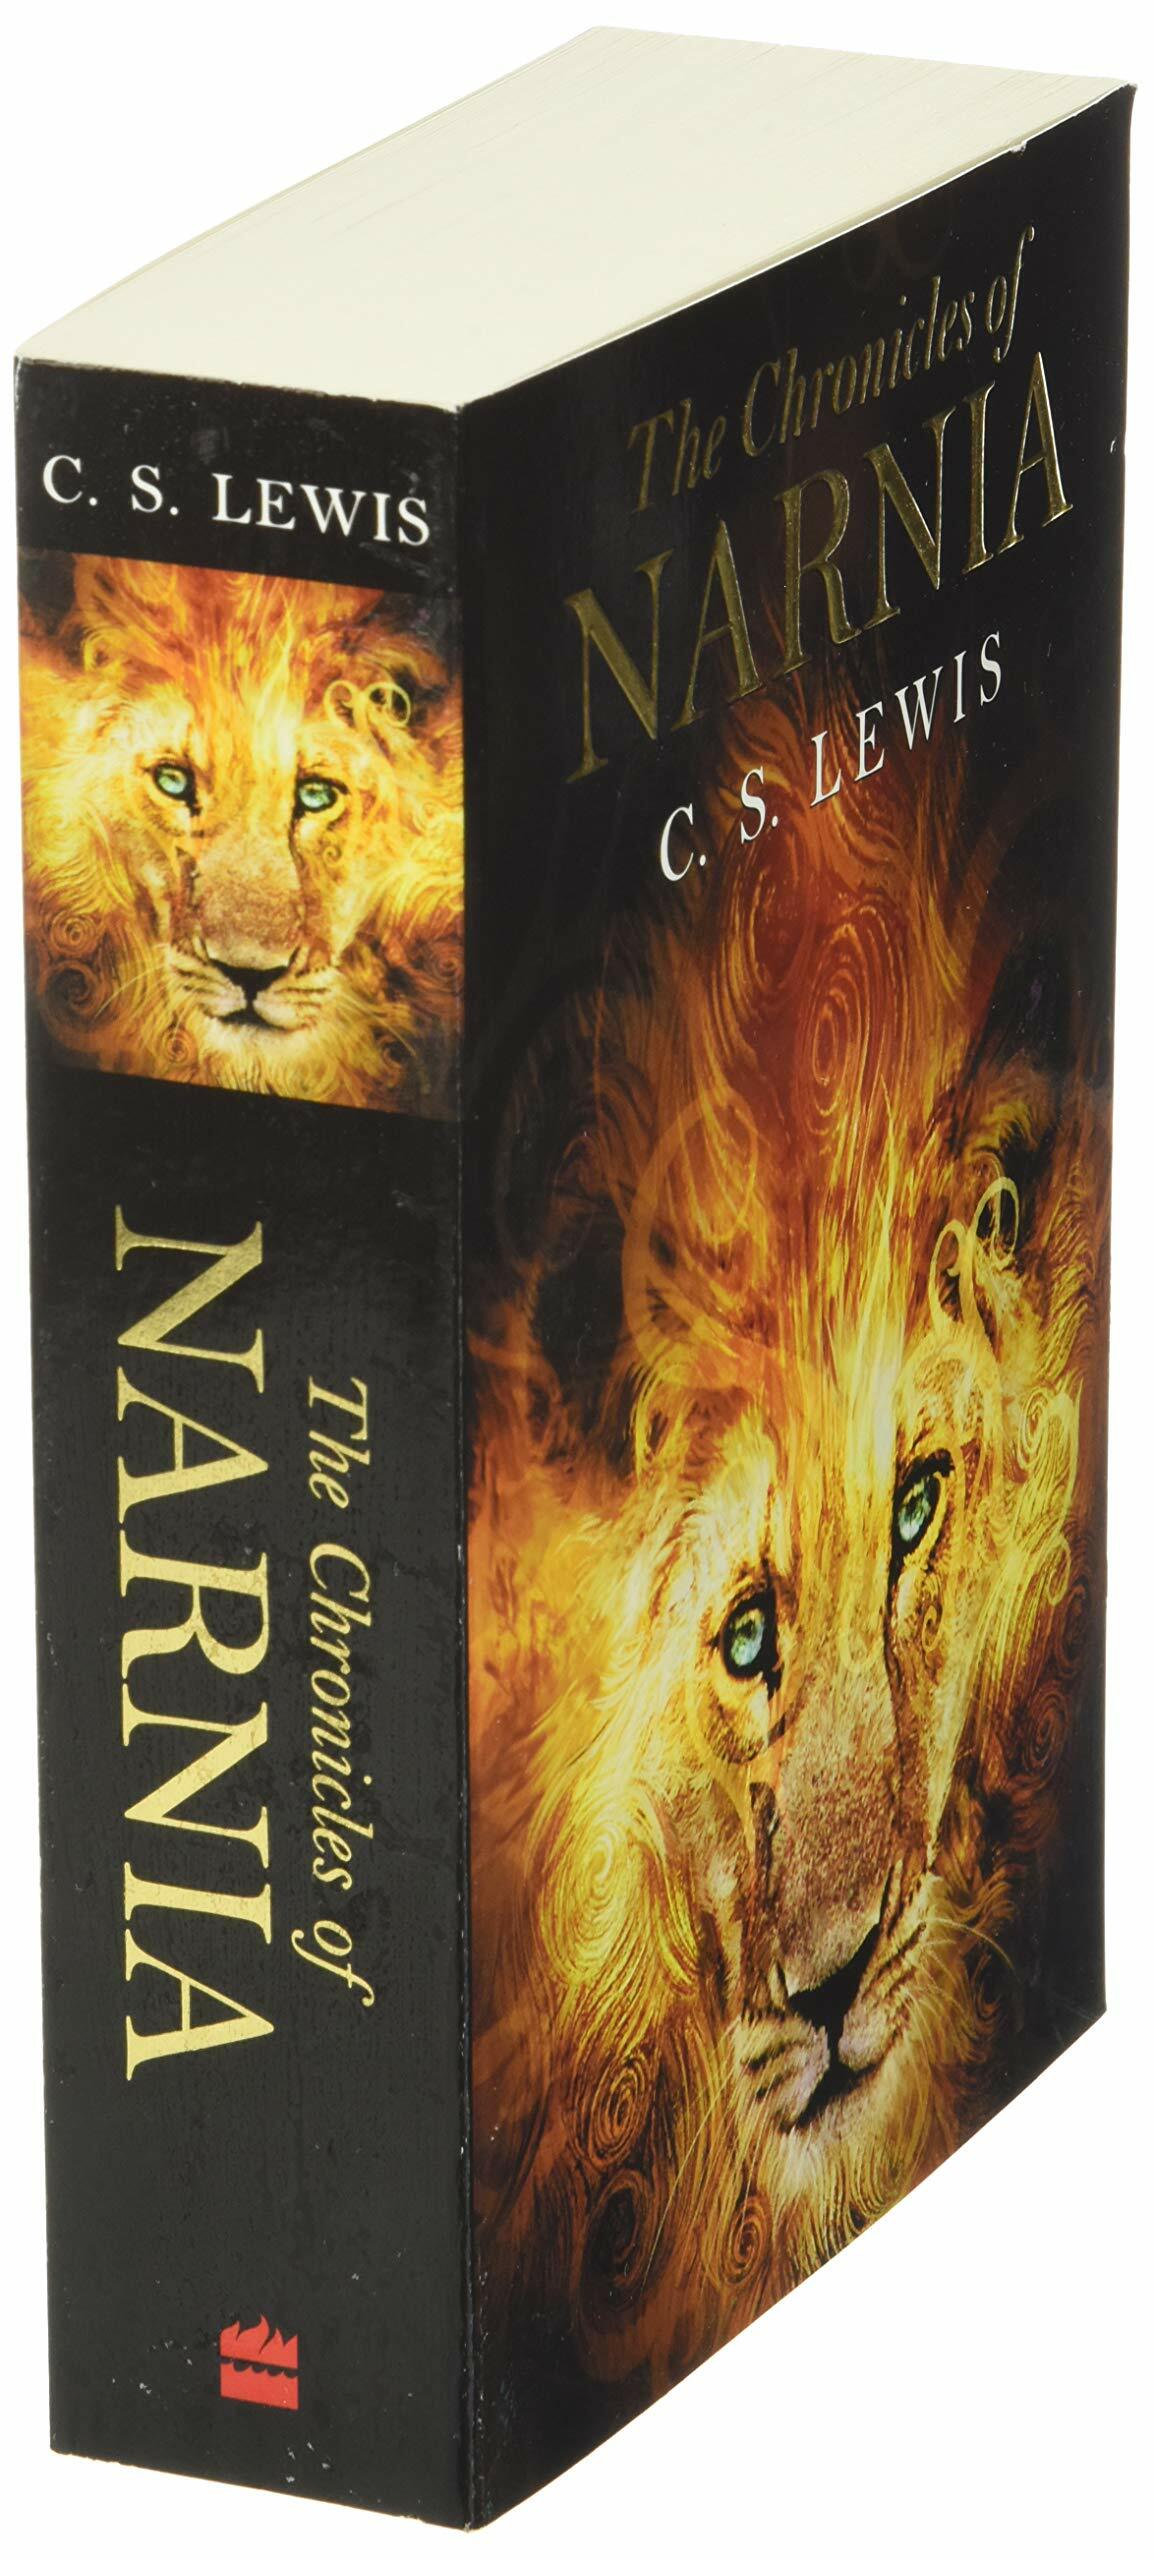 The Chronicles of Narnia: 7 Books in 1 Paperback (Paperback, Revised)